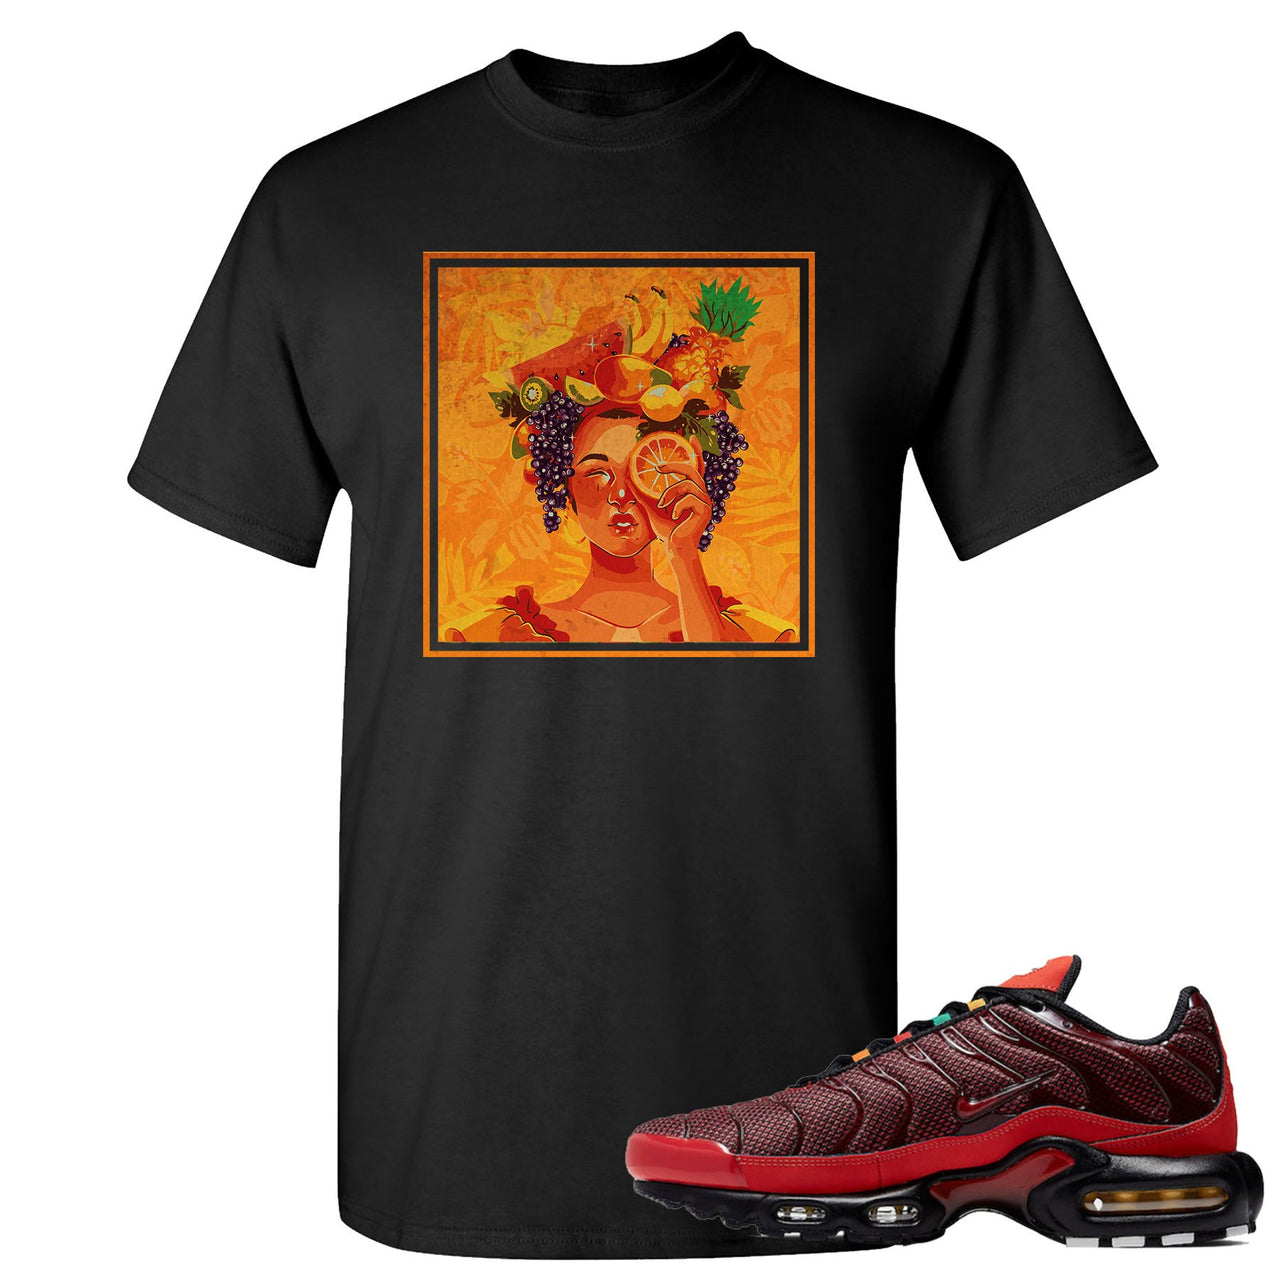 printed on the front of the air max plus sunburst sneaker matching black tee shirt is the lady fruit logo